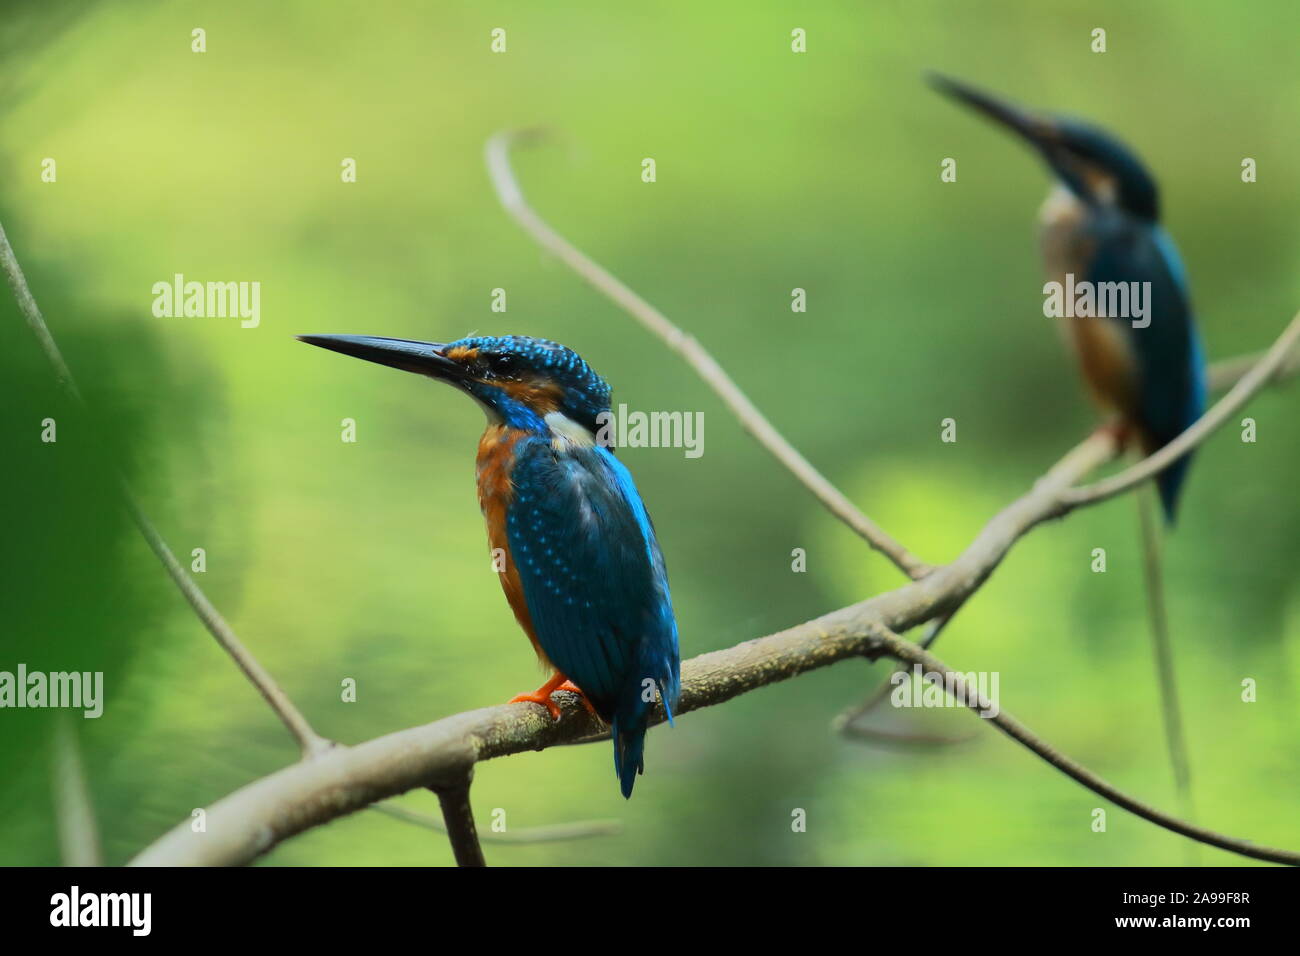 Pair of Common kingfisher (Alcedo atthis) sitting on a branch, doing breeding display,Sundarbans delta region in West Bengal in India Stock Photo